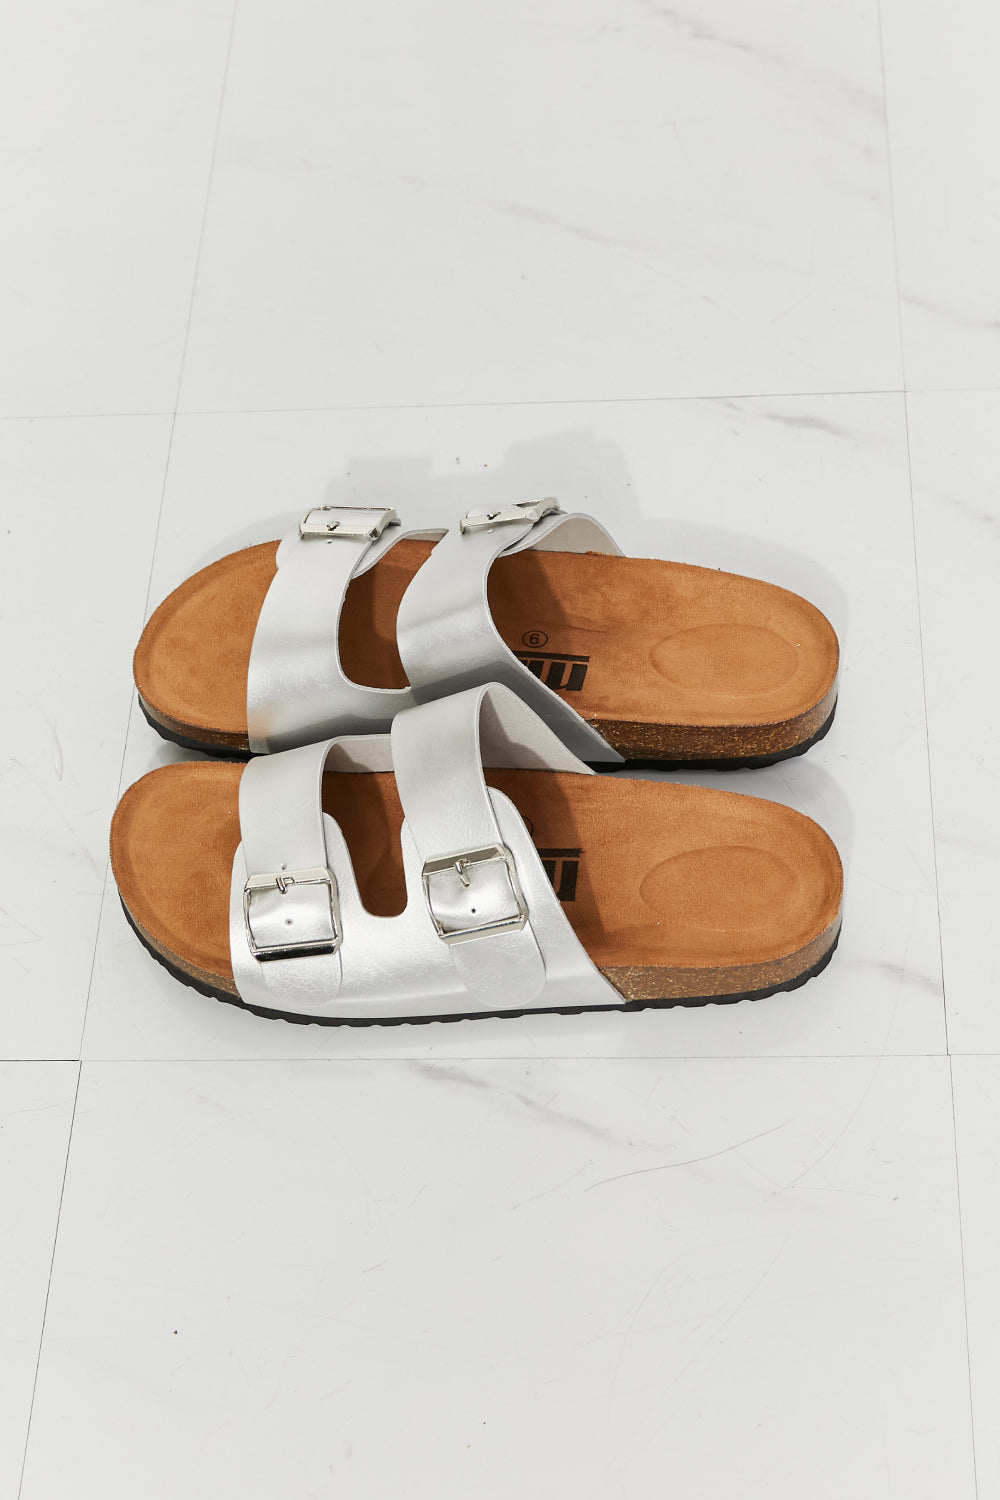 - MMShoes Best Life Double-Banded Slide Sandal in Silver - Ships from The US - womens slides at TFC&H Co.